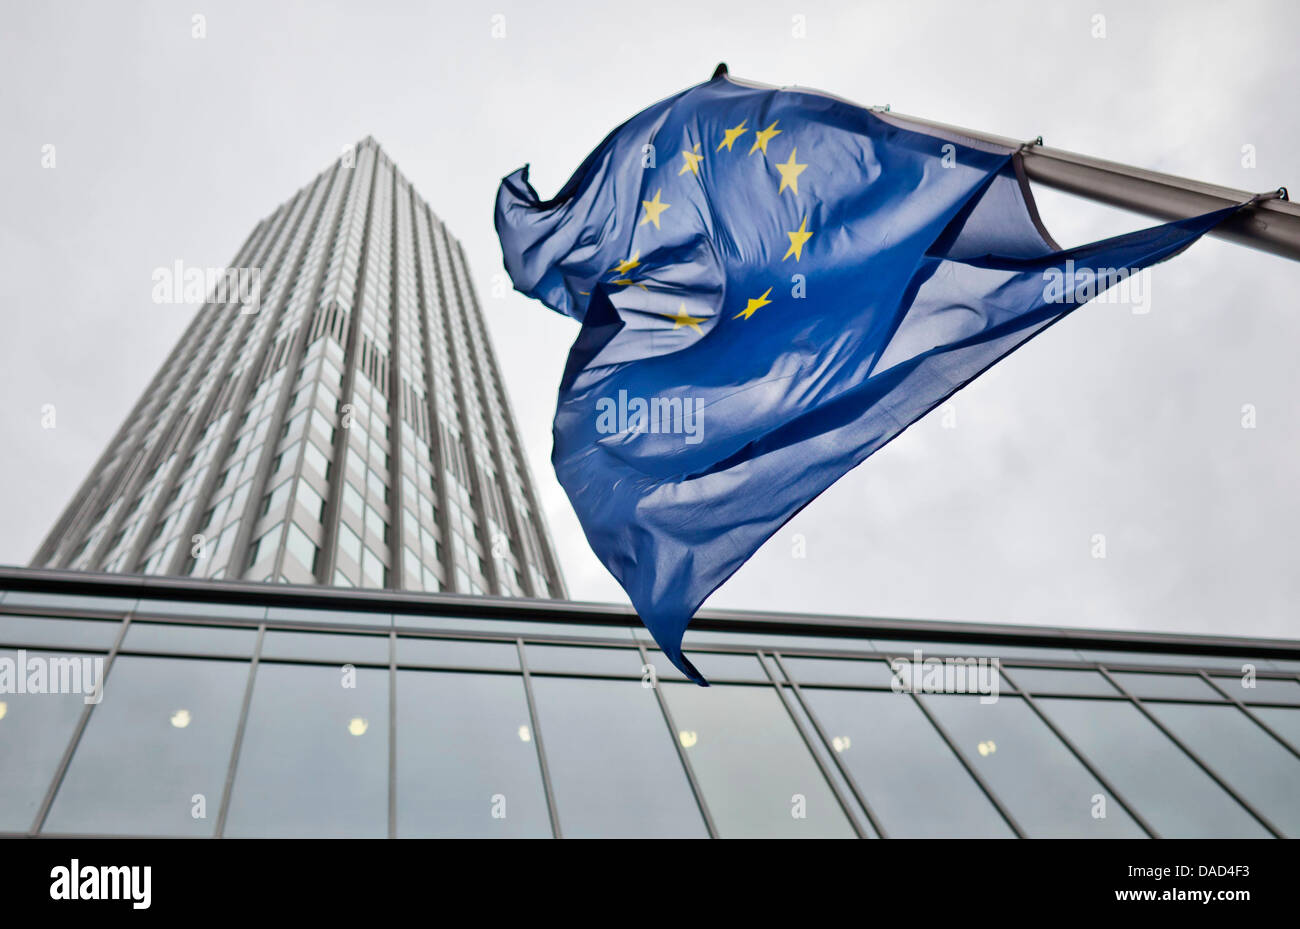 The flag of the European Union sways in the wind in front of the headquarter of the European Central Bank (ECB) in Frankfurt, Germany, 5 October 2011. The downgrading of Italy's credit rating by the rating agency Moody has hardly effected the euro. The euro was valued earlier this morning at 1.3320 USD and showed even an increase in value in comparison to the previous day. Photo: F Stock Photo